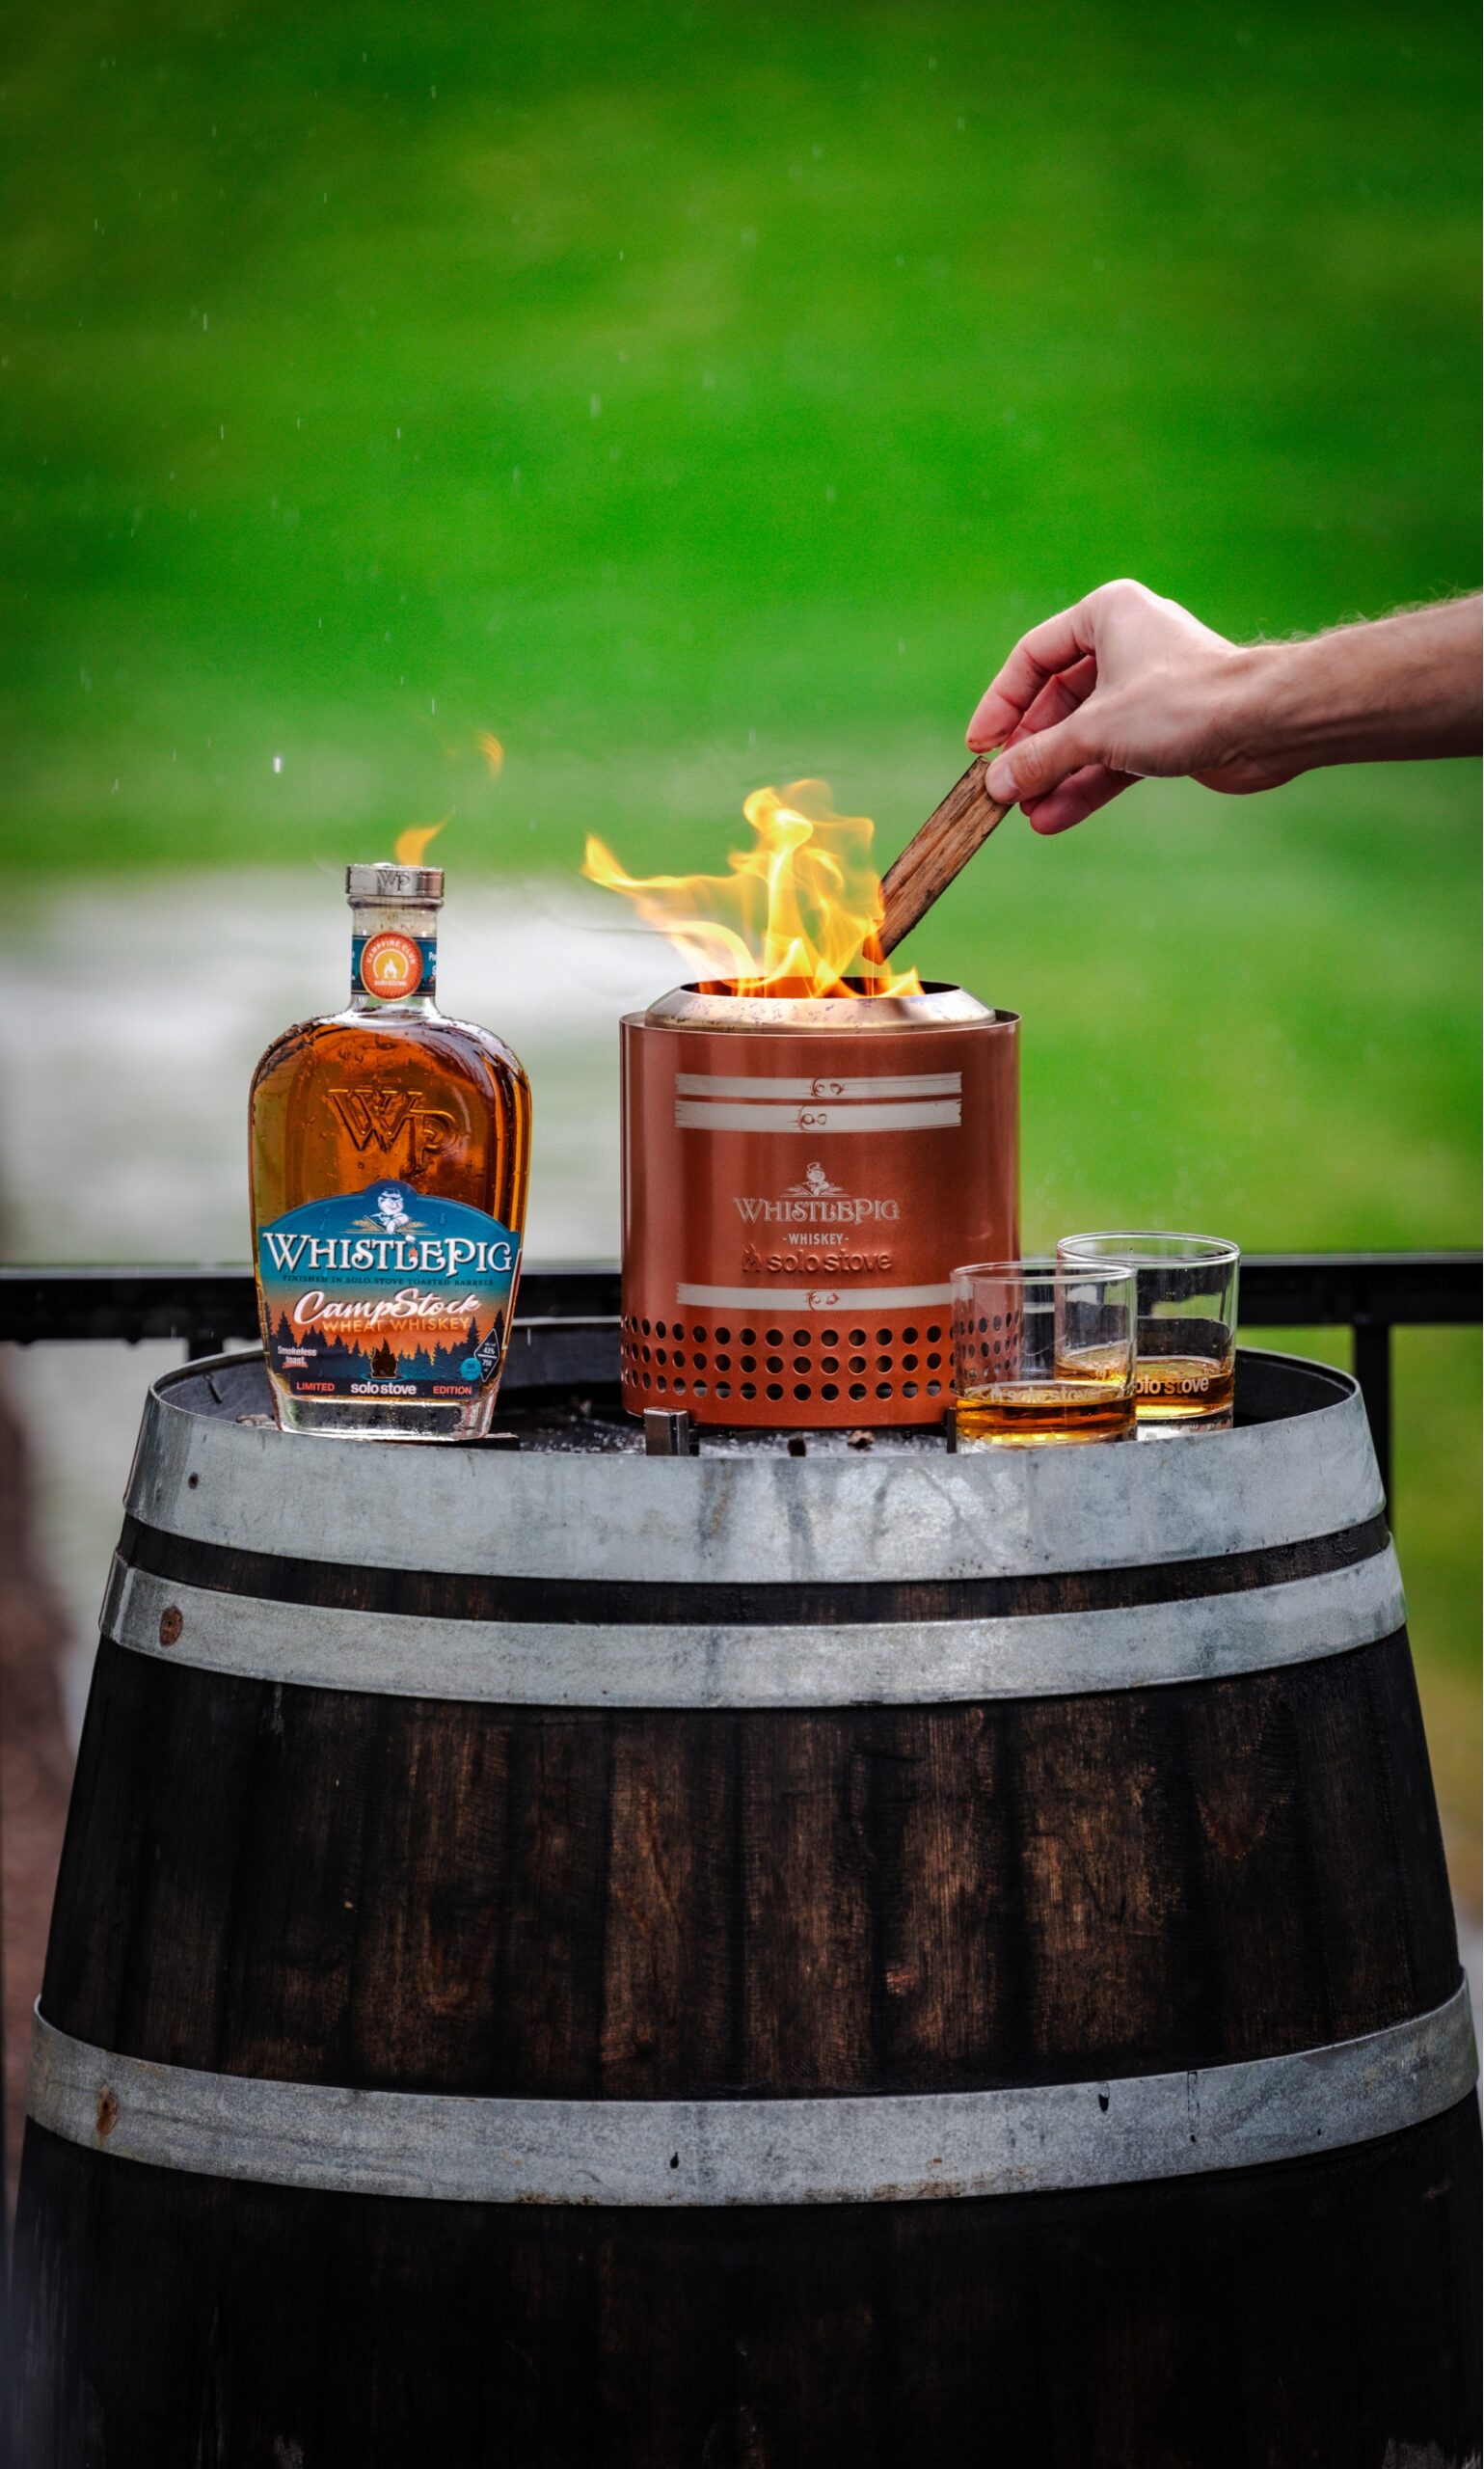 CampStock Wheat Whiskey - A New Collaboration from Solo Stove & WhistlePig